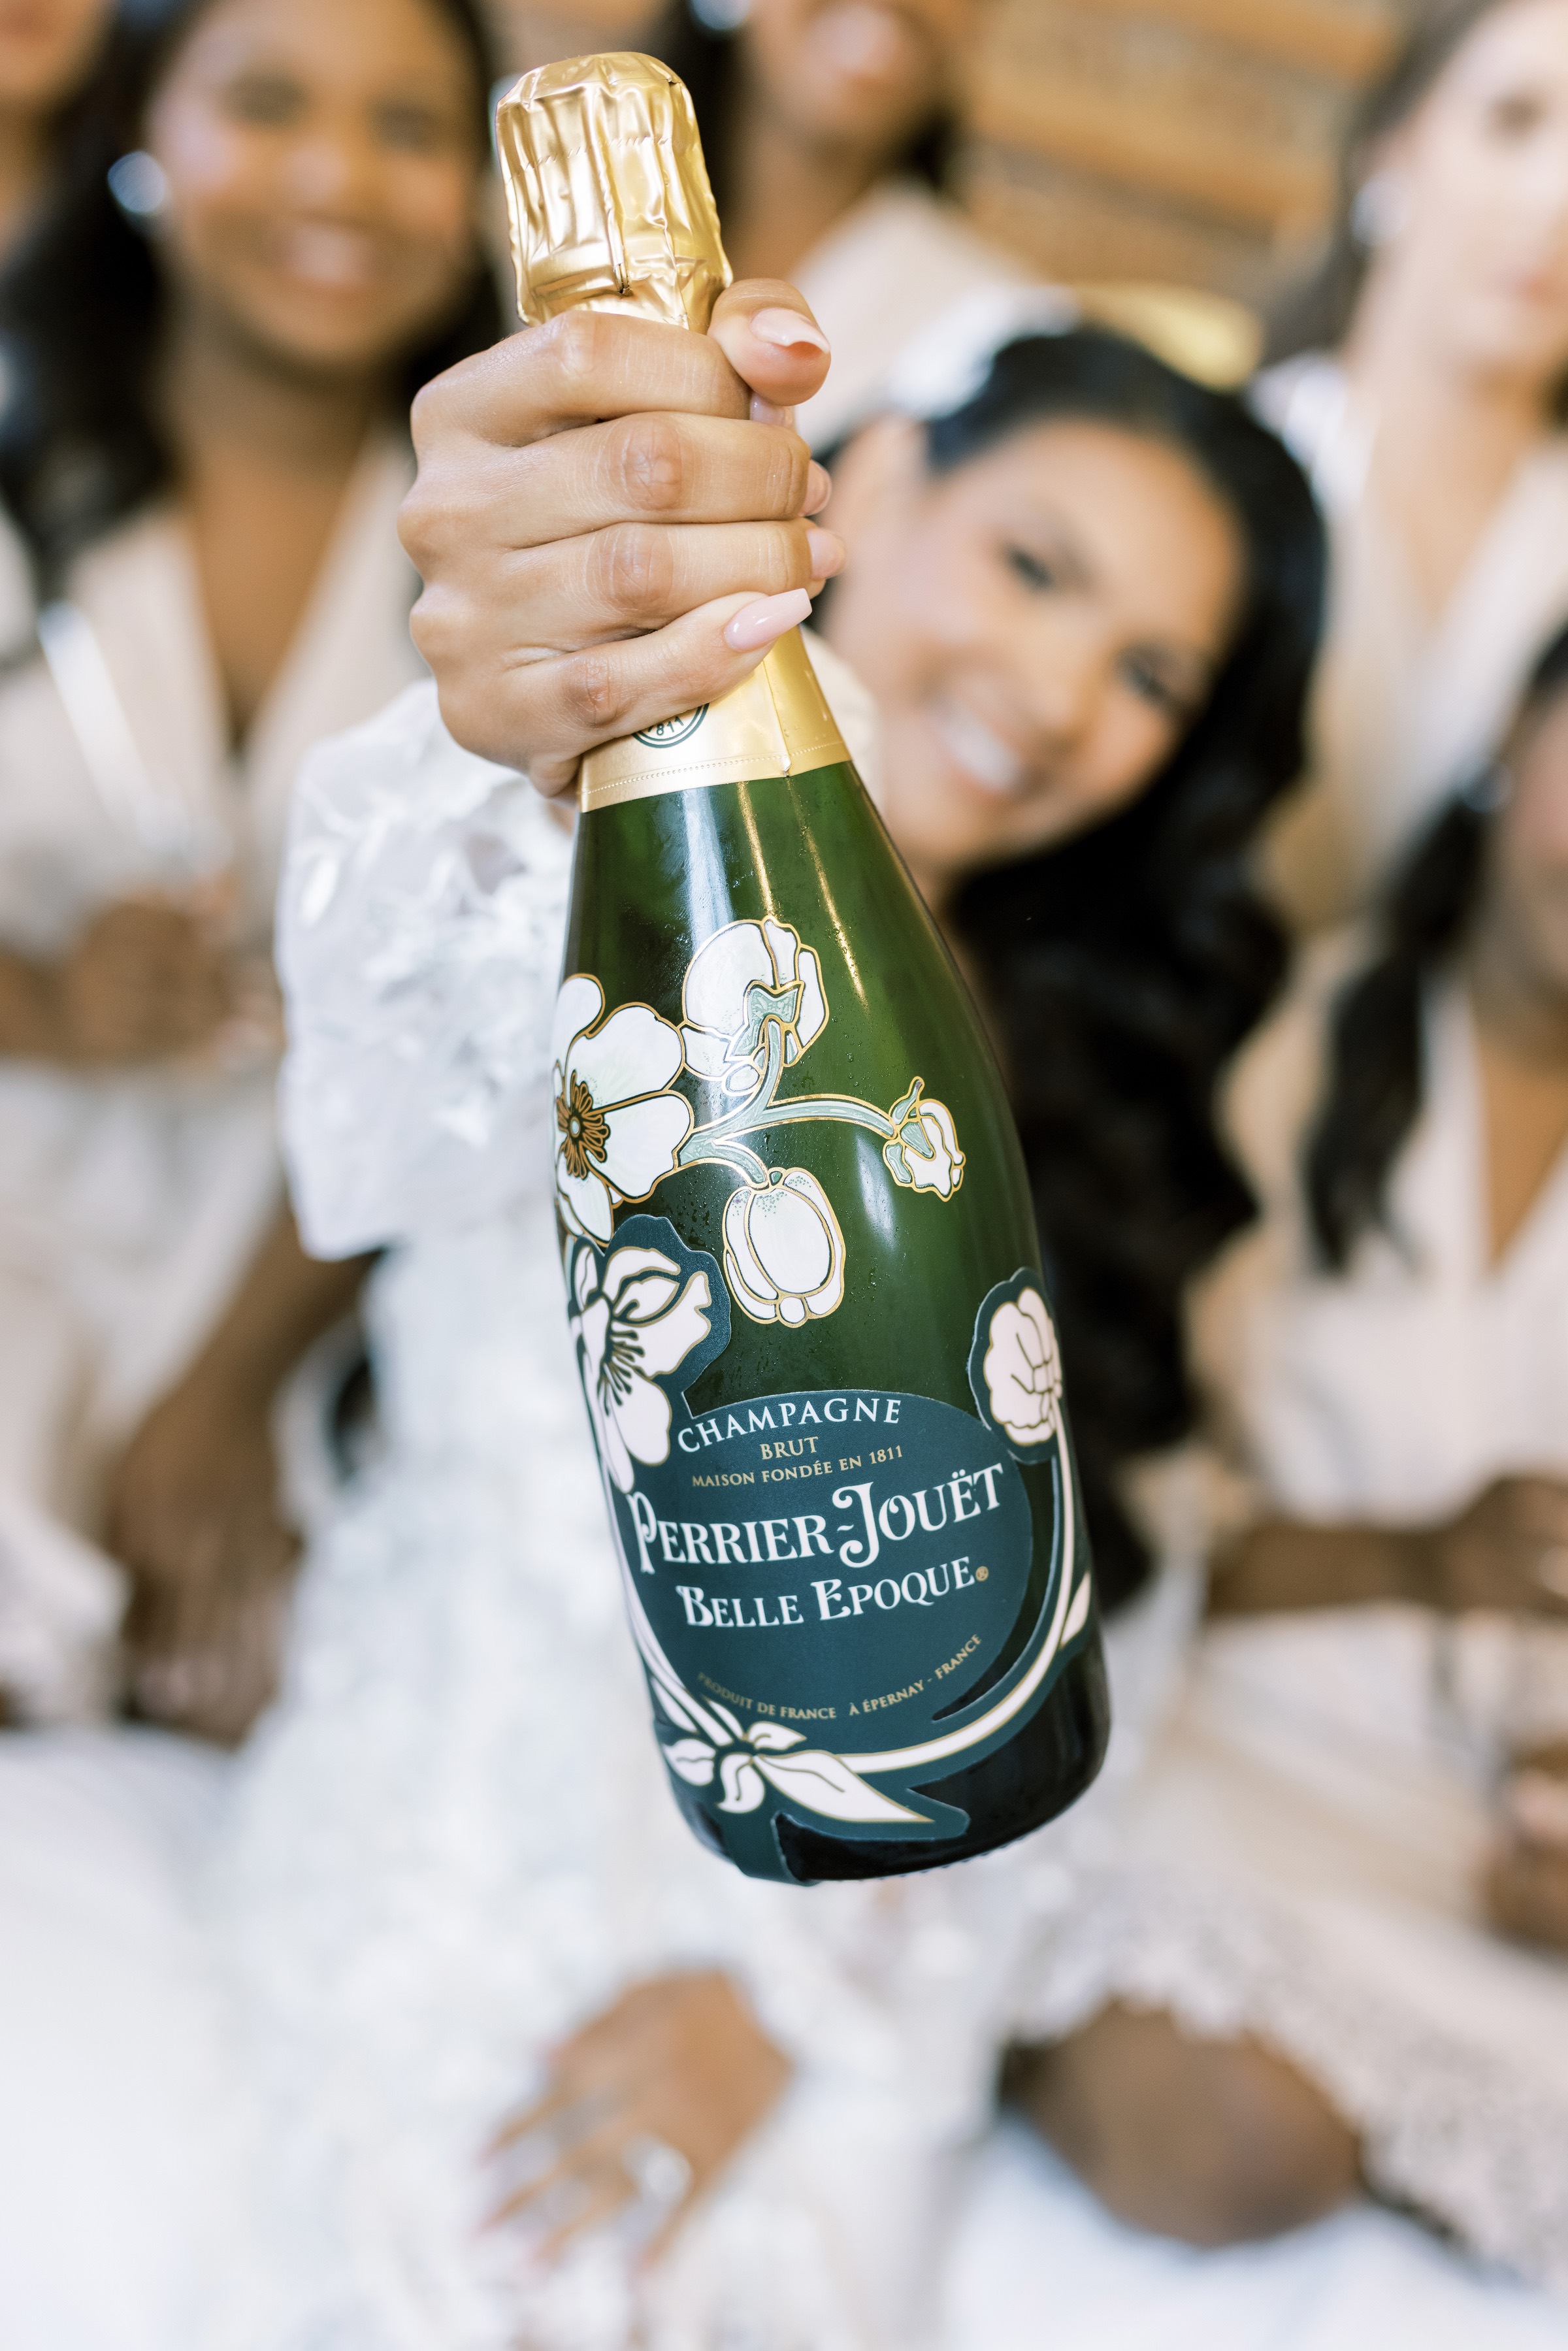 Fun Bridal party photo - Photography: Brooke Images